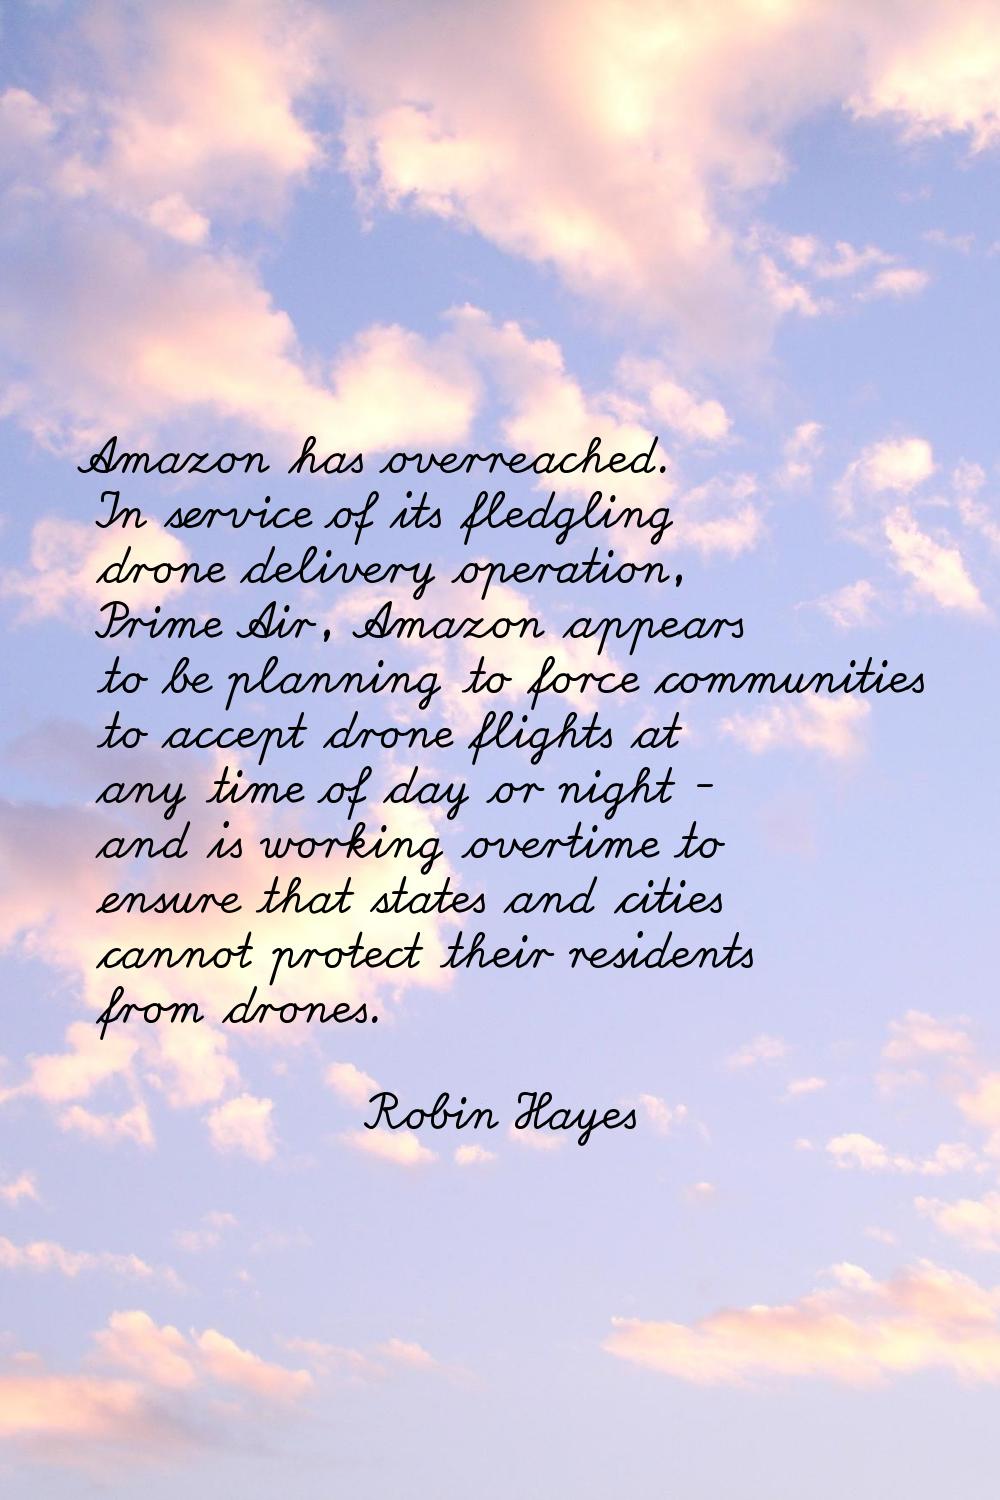 Amazon has overreached. In service of its fledgling drone delivery operation, Prime Air, Amazon app